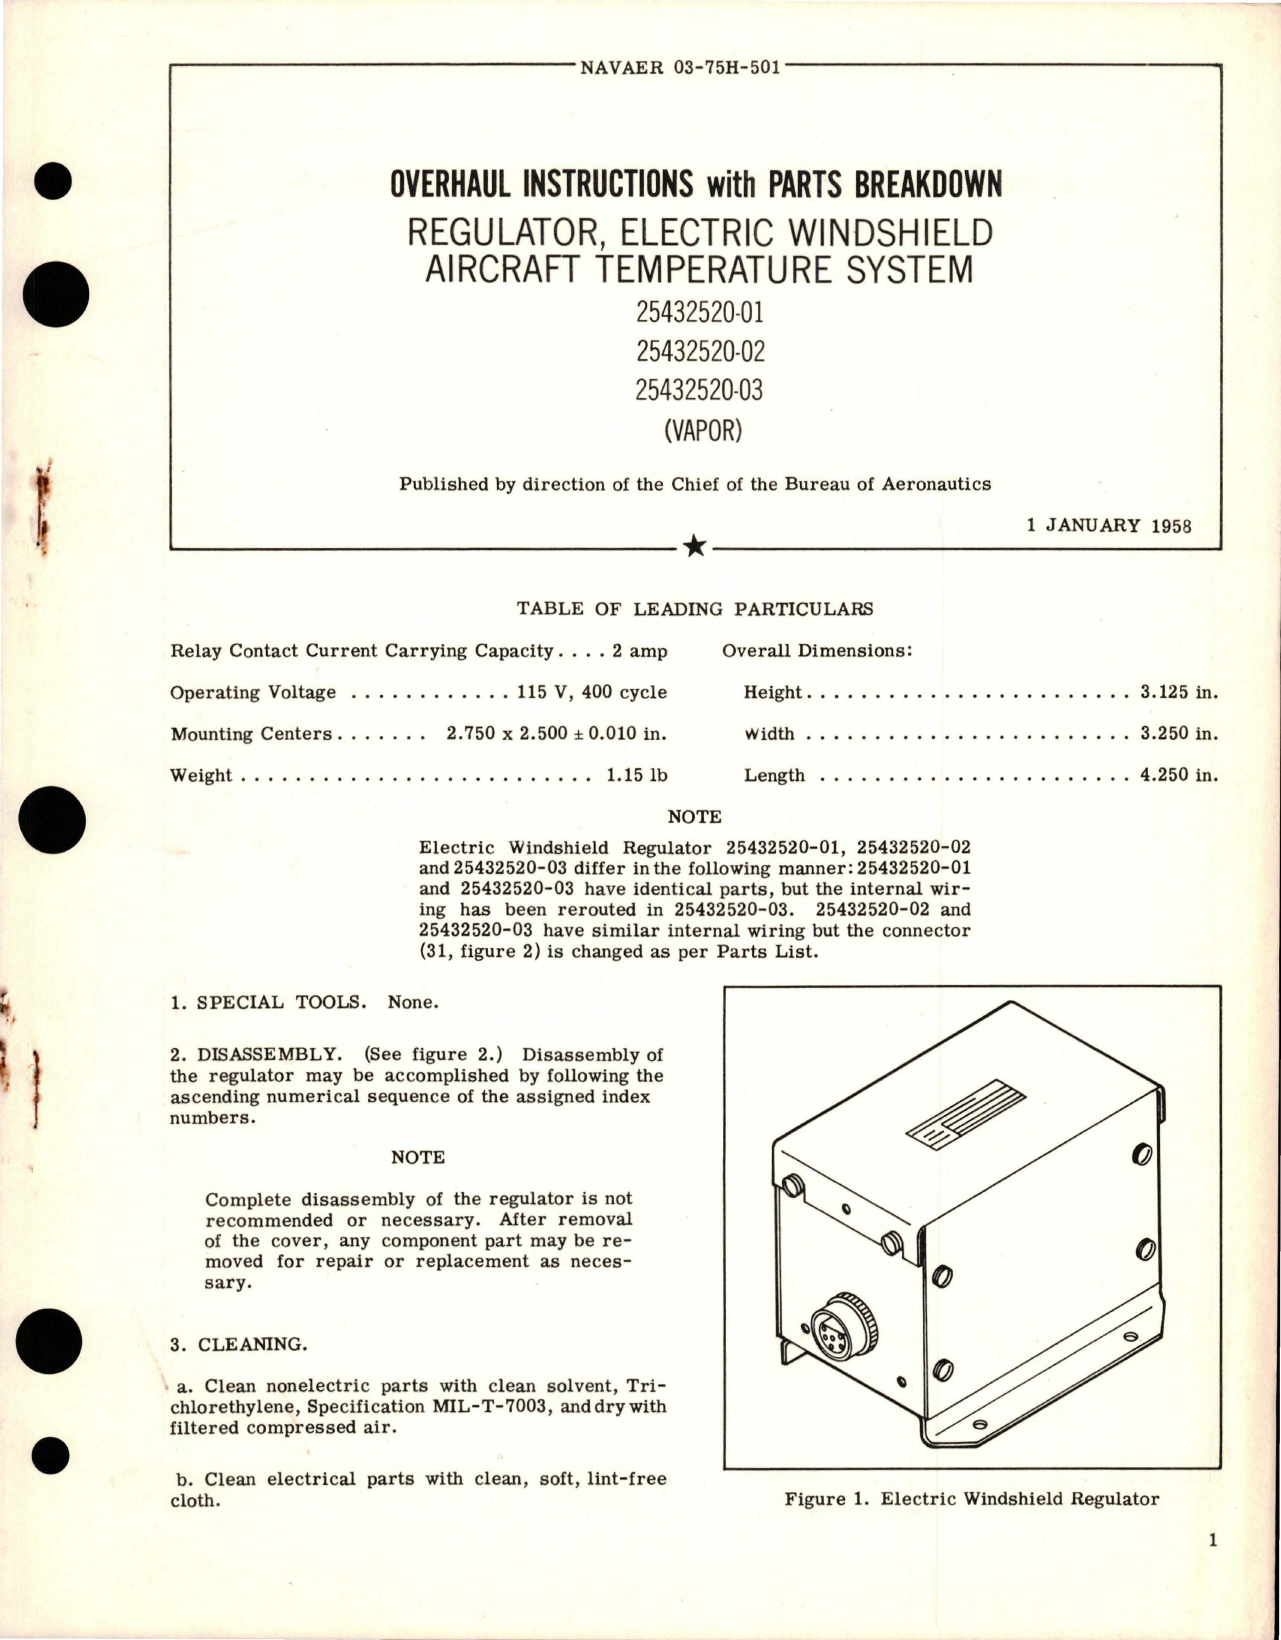 Sample page 1 from AirCorps Library document: Overhaul Instructions with Parts Breakdown for Electric Windshield Aircraft Temperature System Regulator 